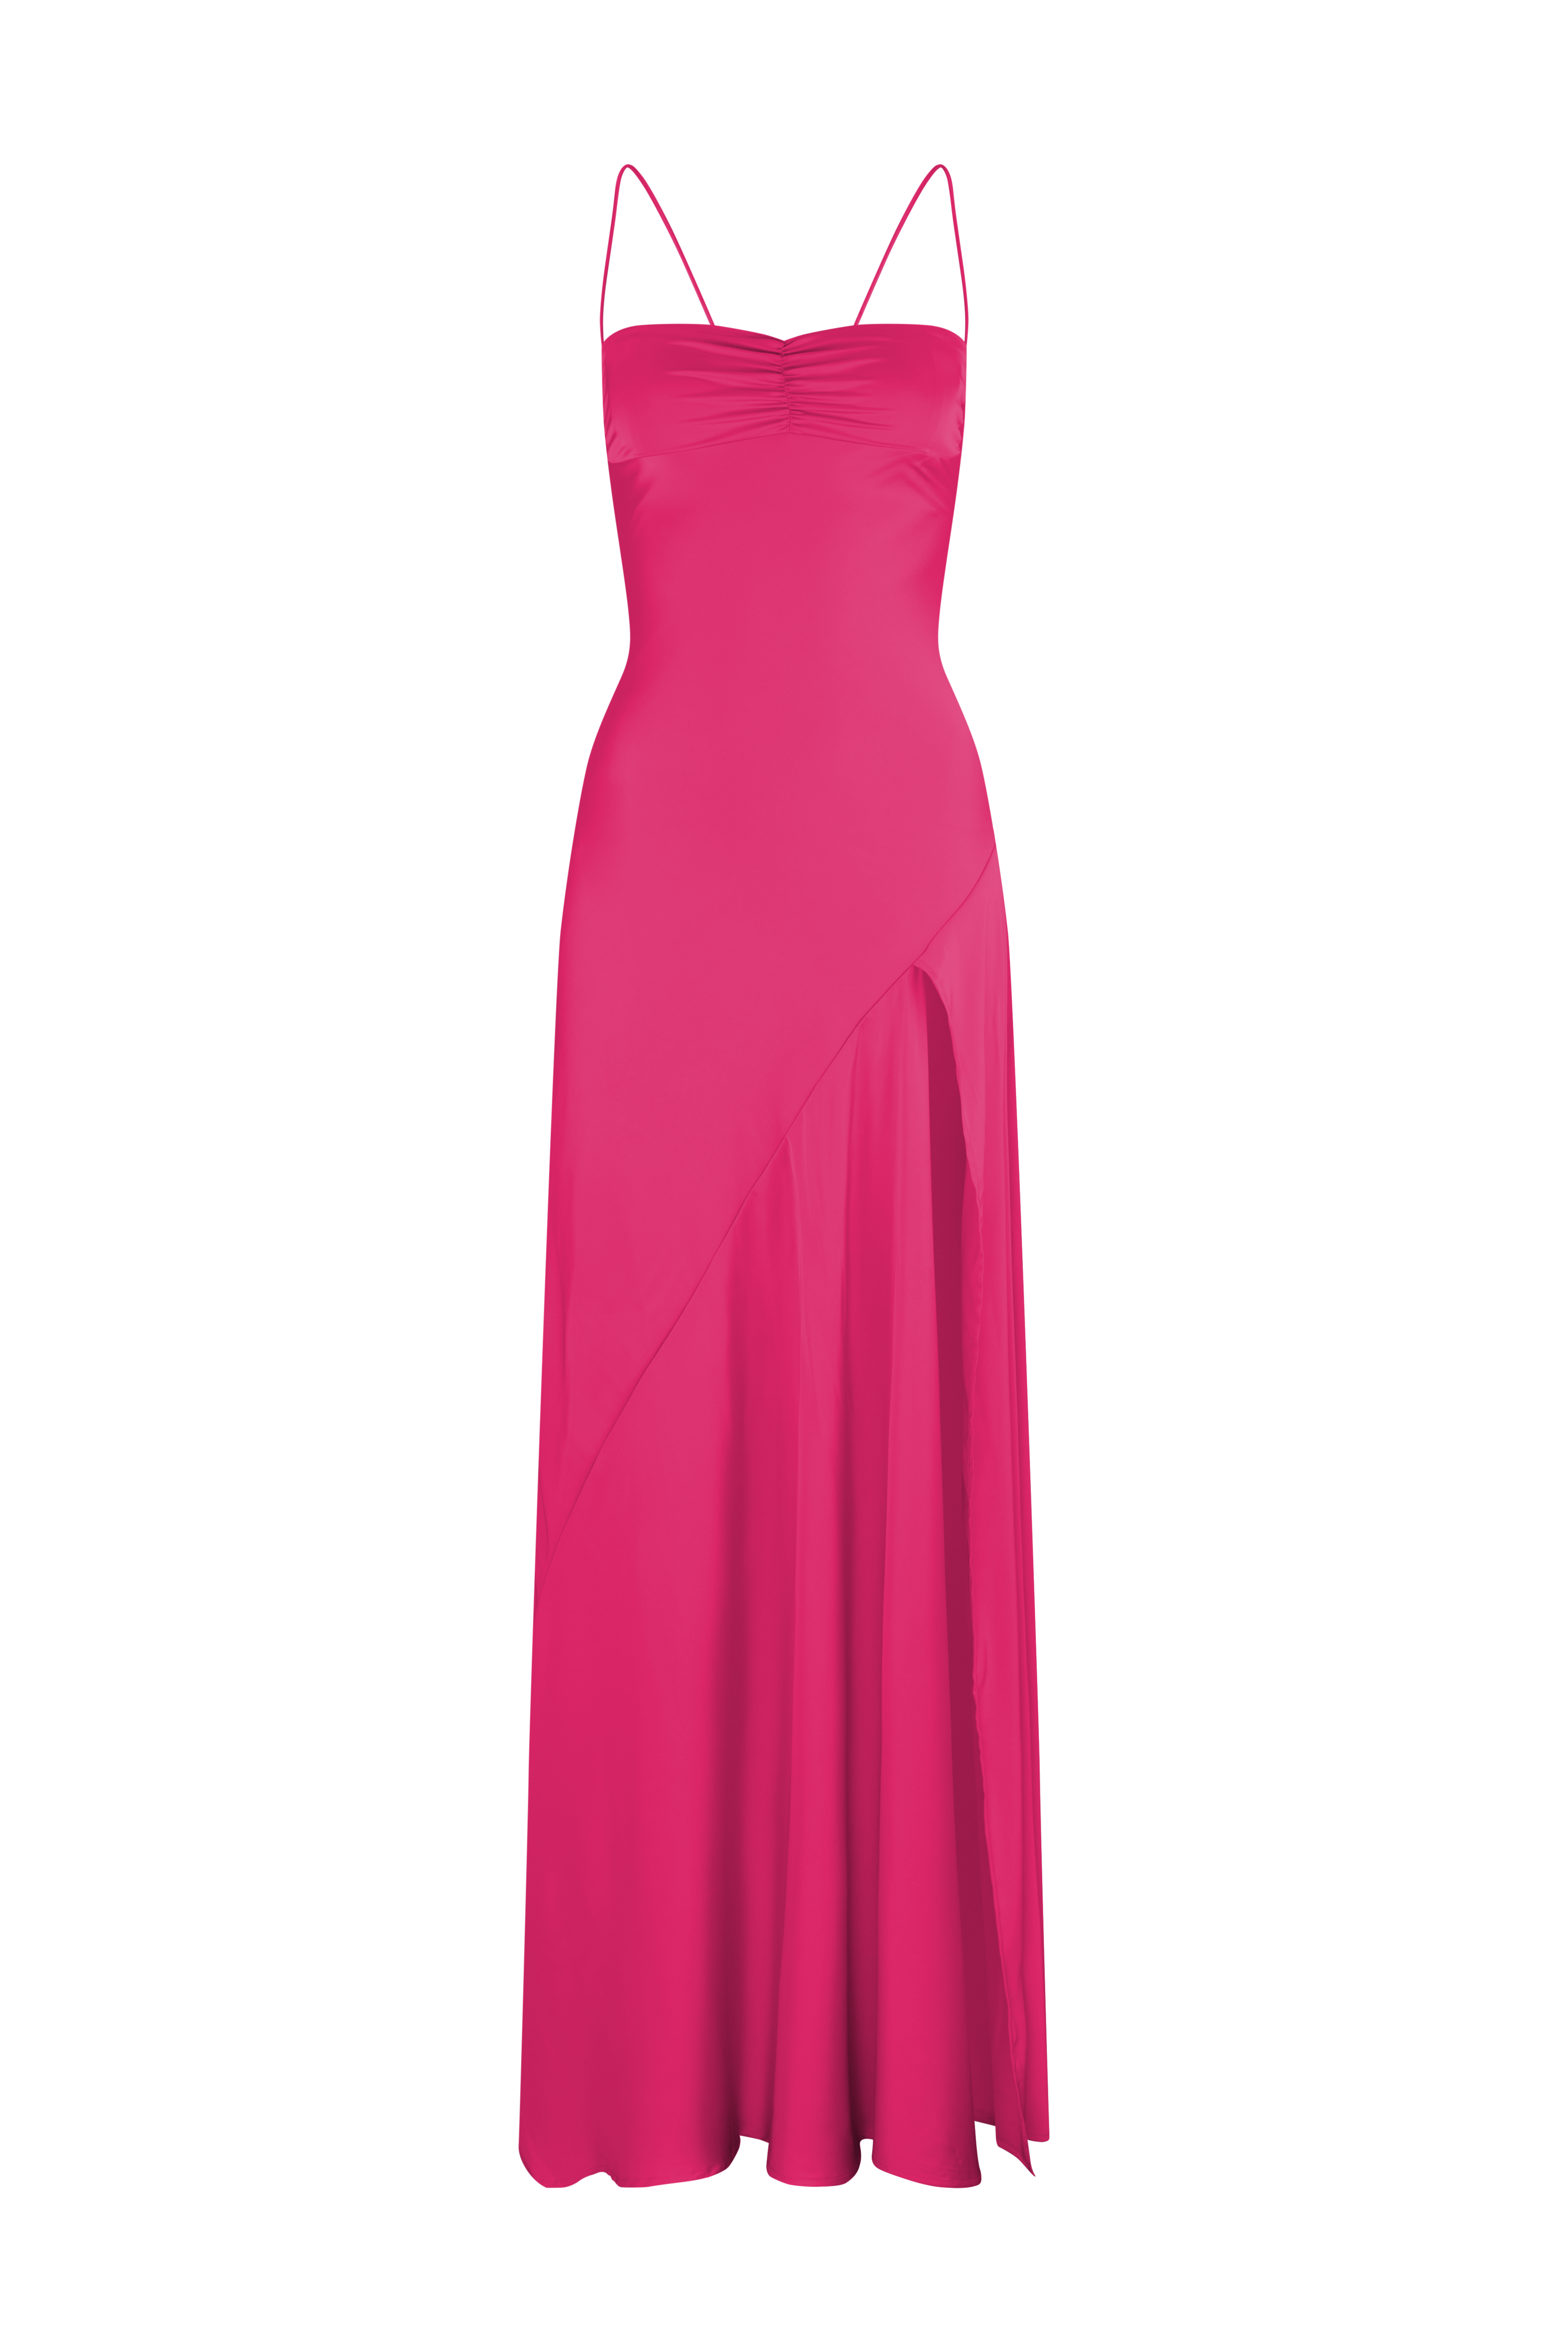 GAIA GOWN: HOT PINK